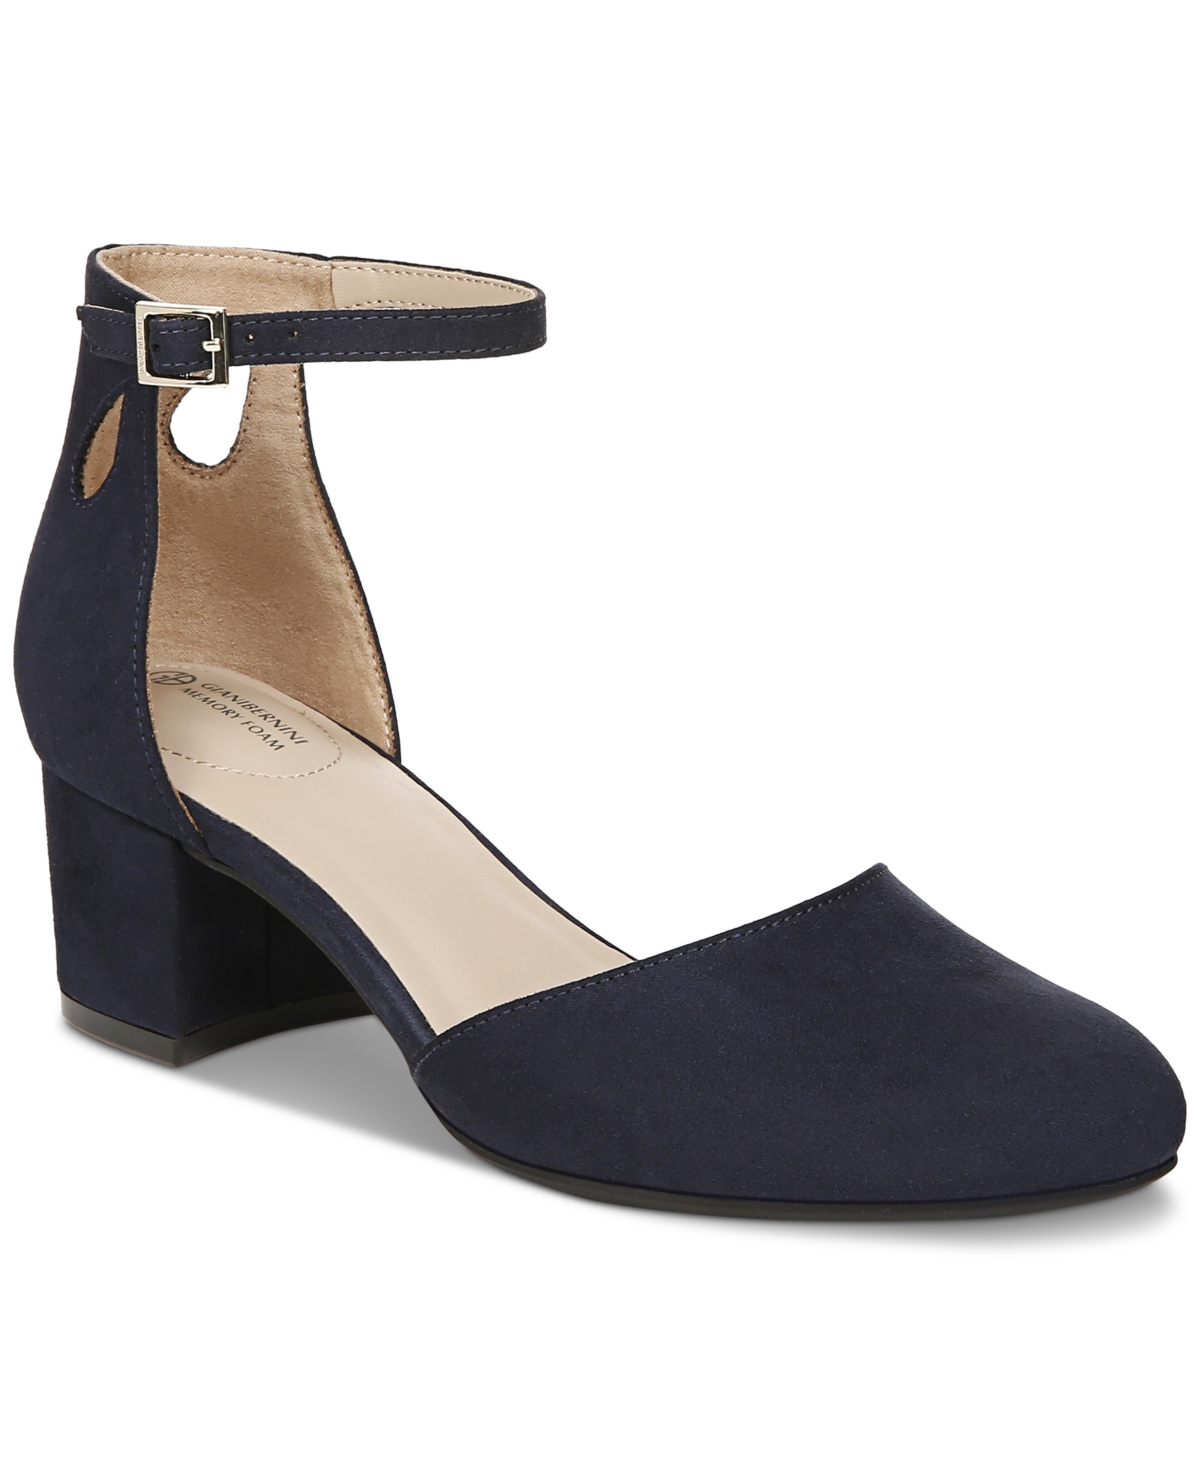 Izzee Memory Foam Two-Piece Pumps, Created for Macy's - Black Suede